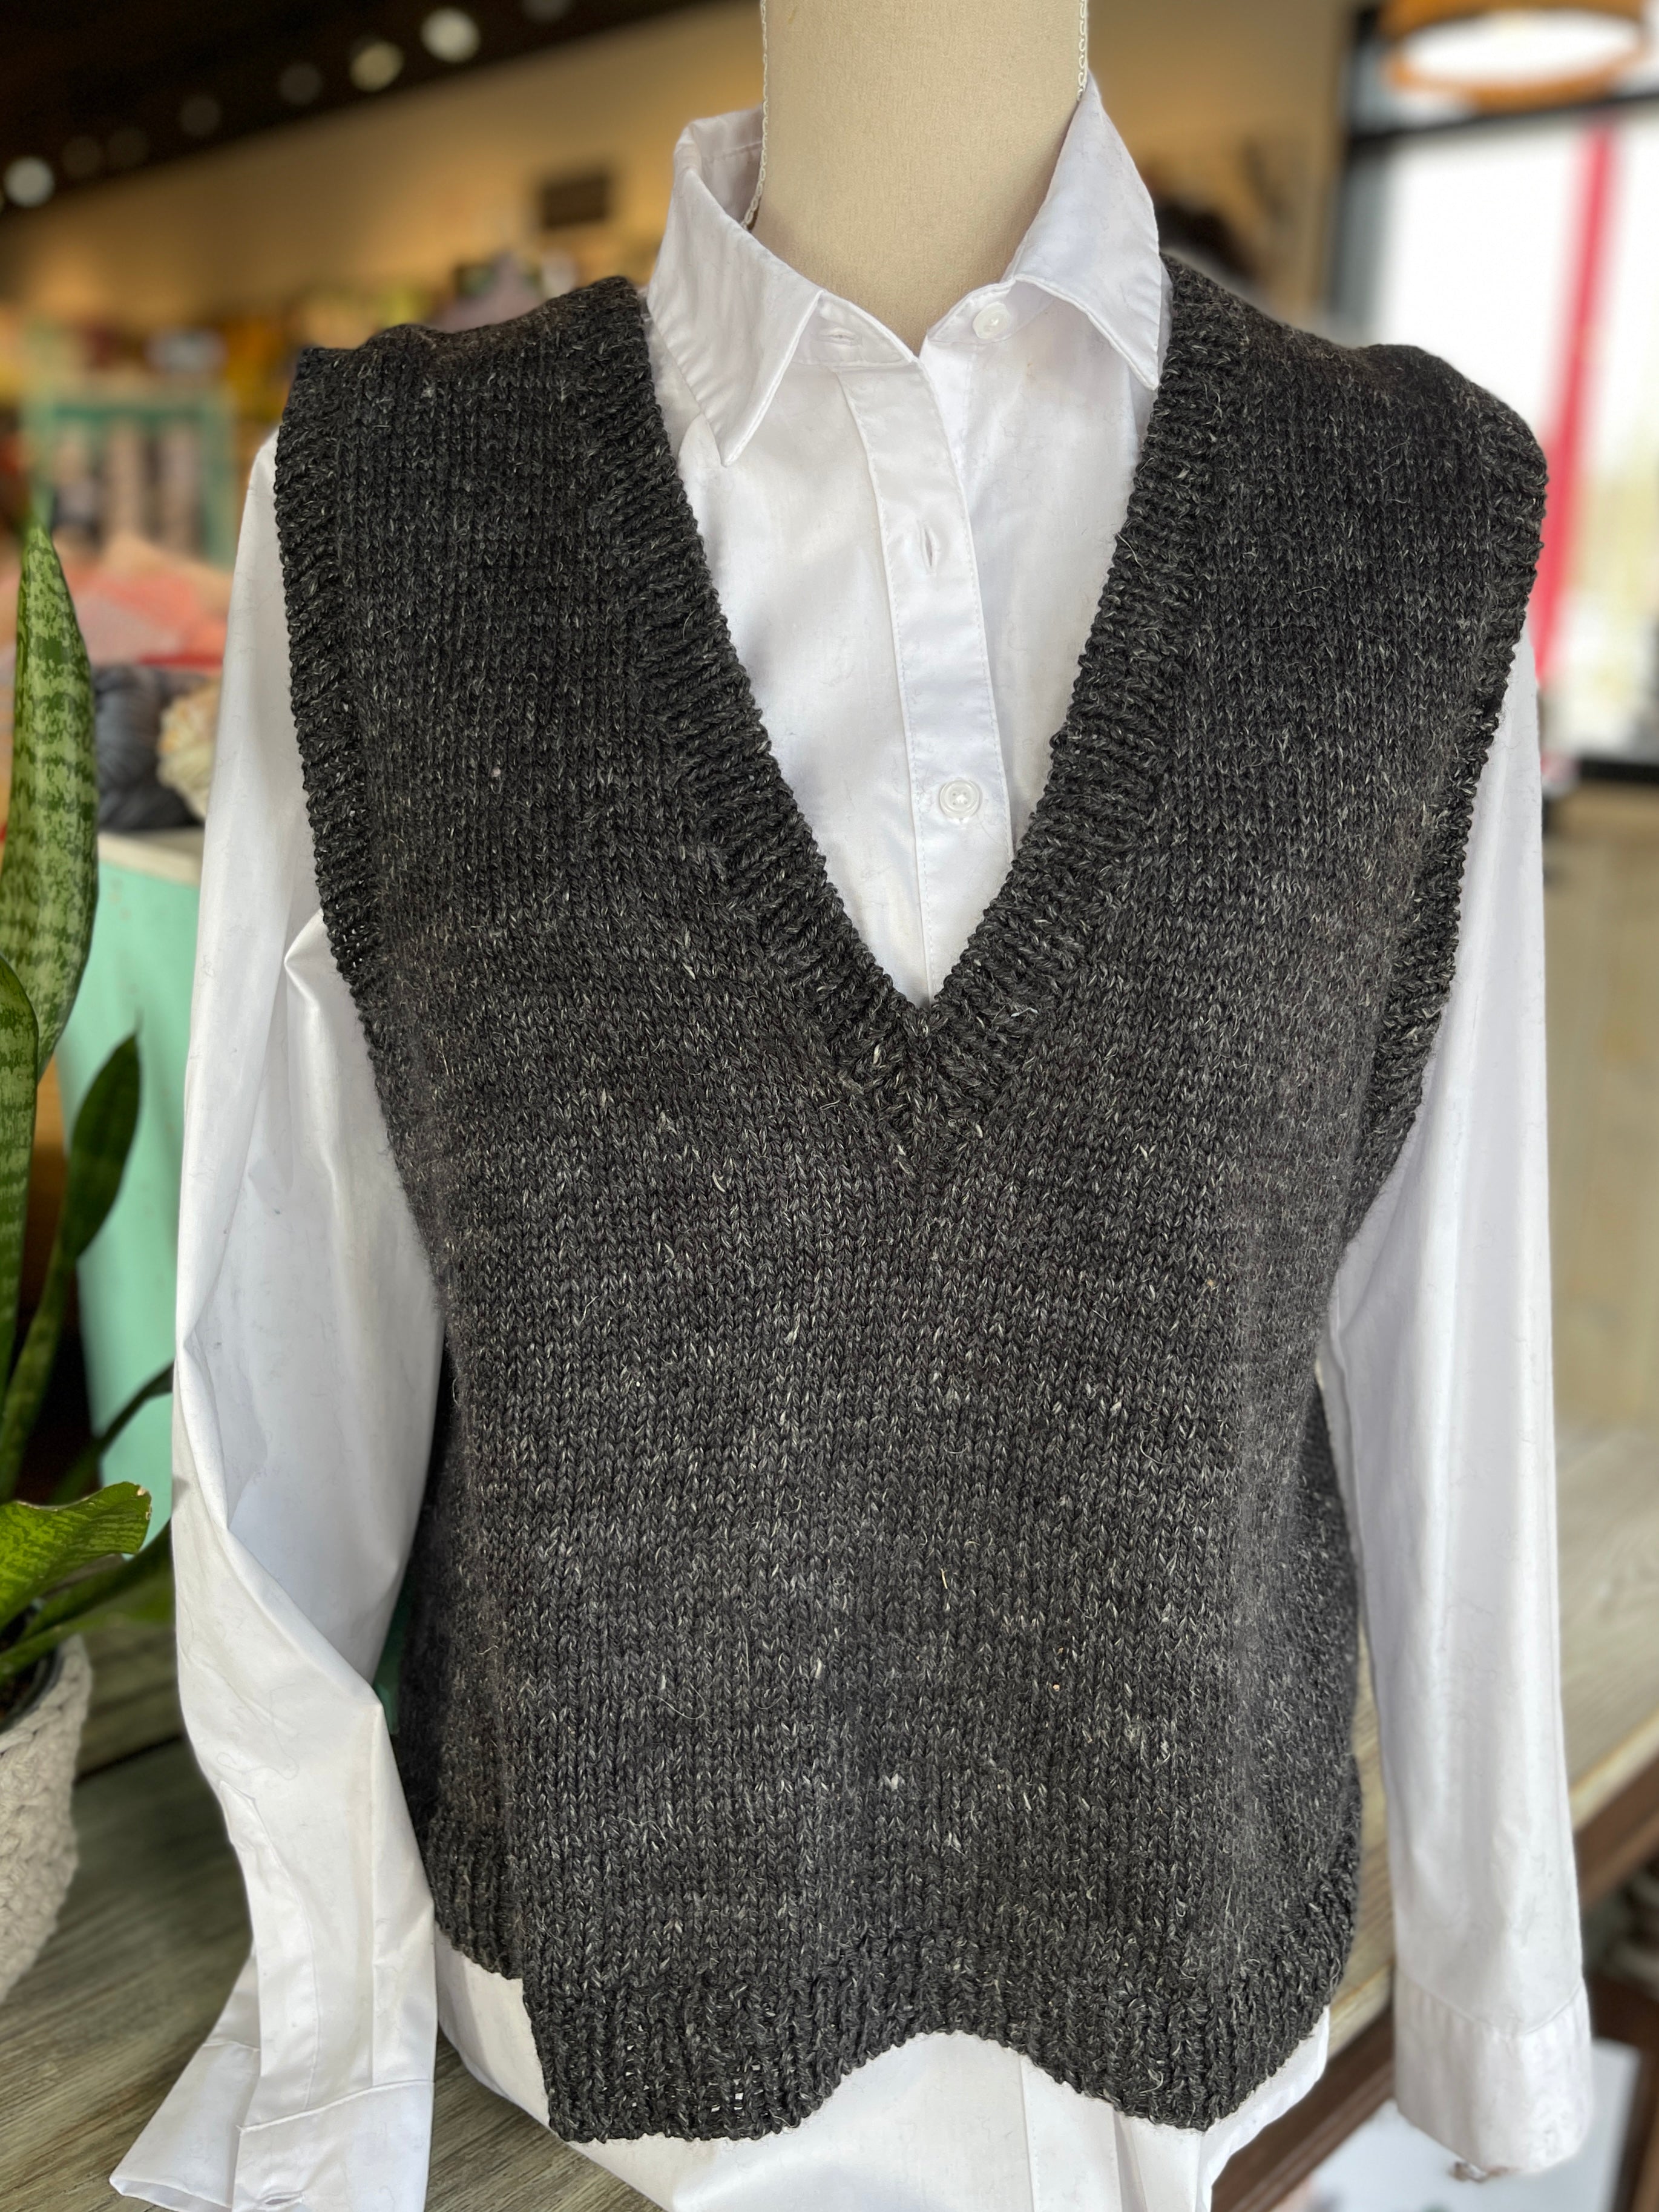 Knitting Kit - Vest no. 2 Spring Edition by My Favourite Things